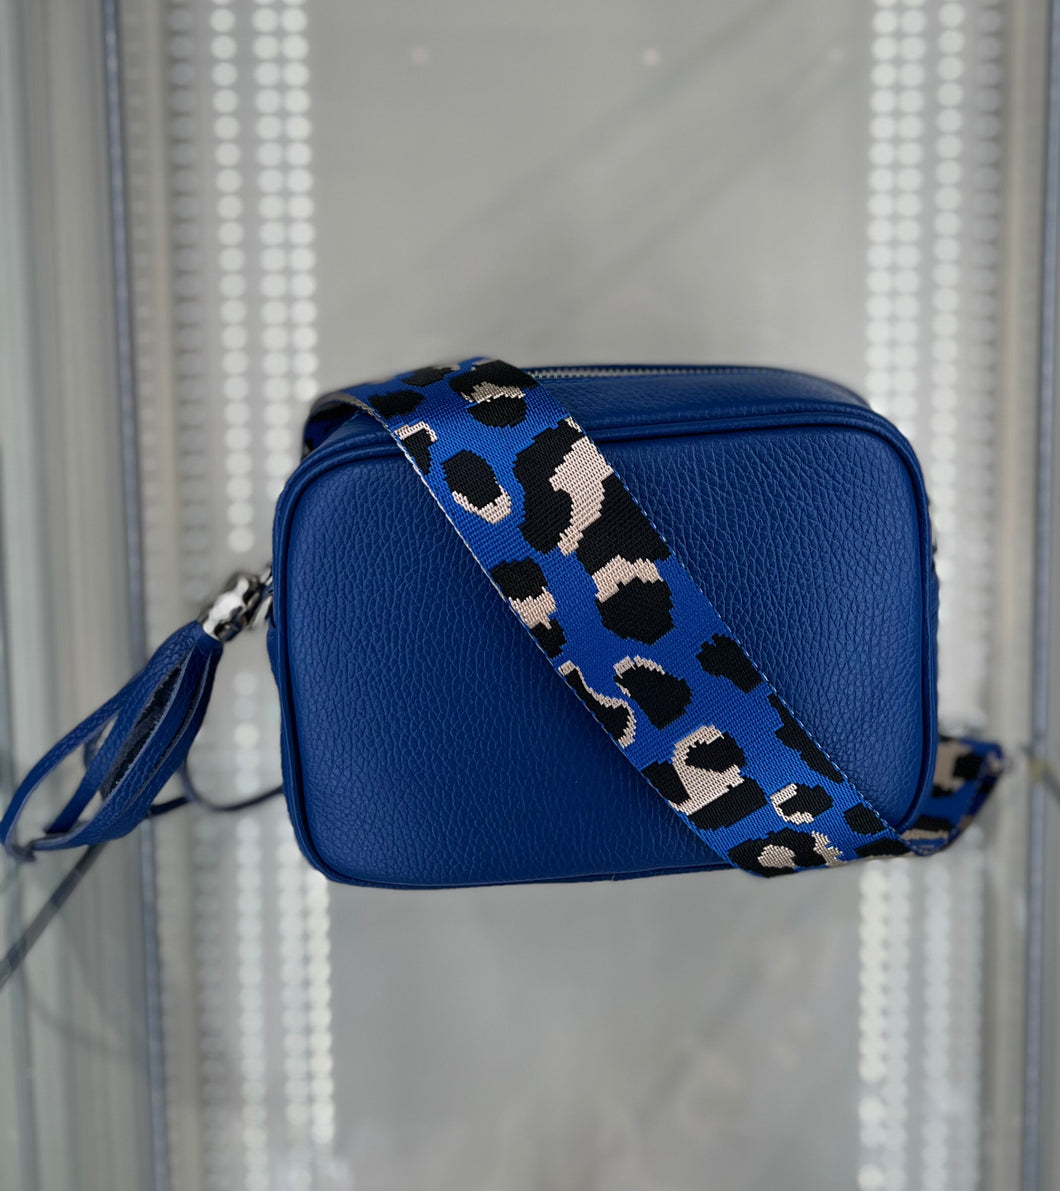 Real Leather Royal Blue Bag with Strap